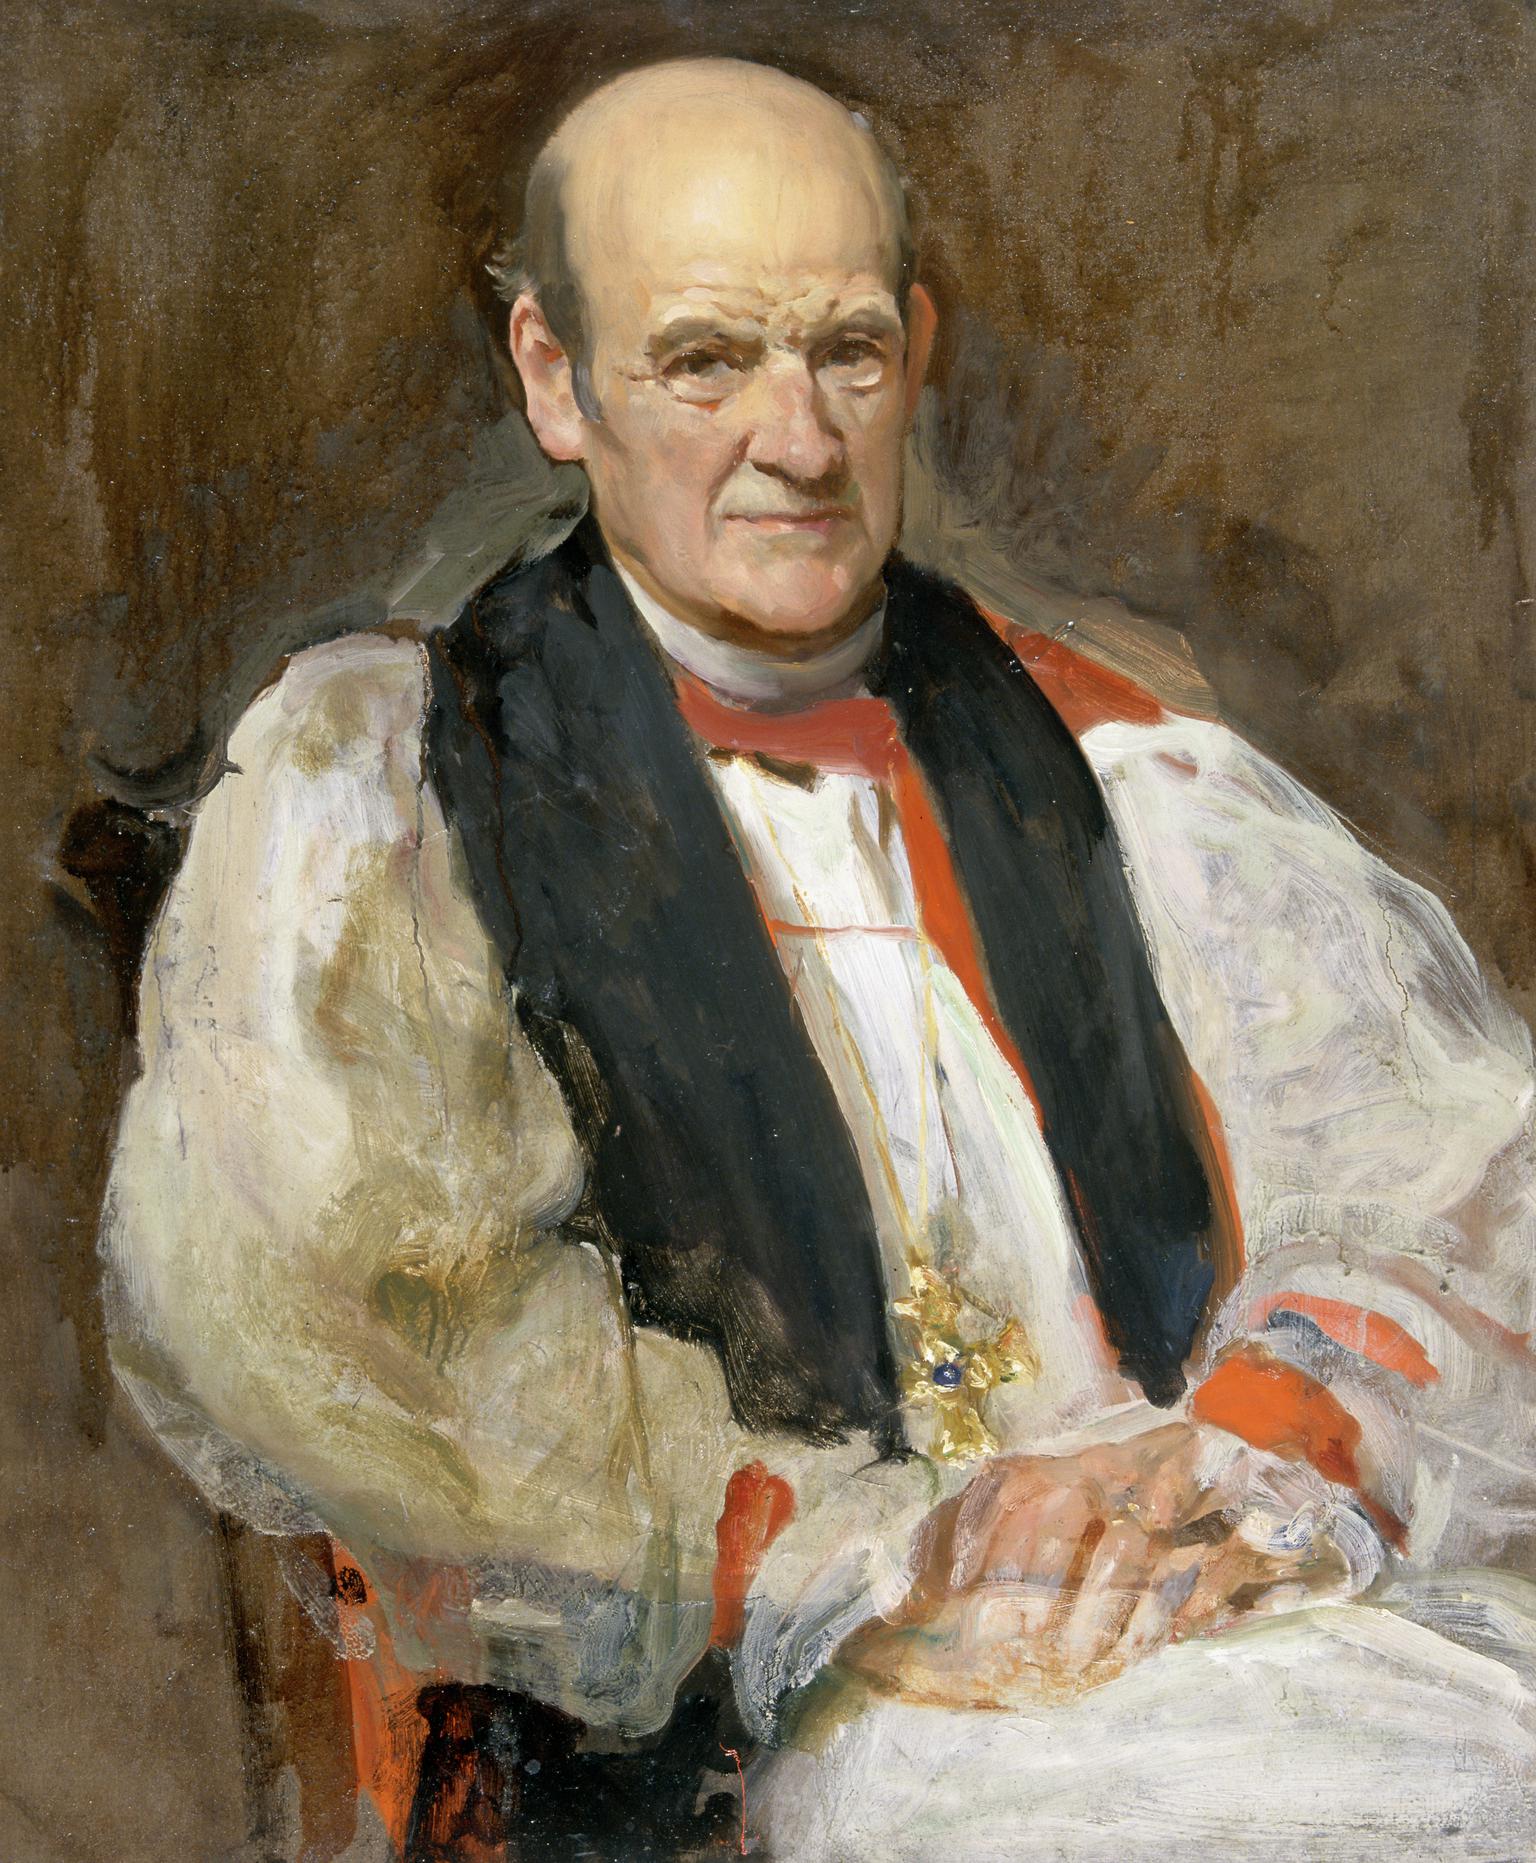 A.G. Edwards, Archbishop of Wales (1848-1937)